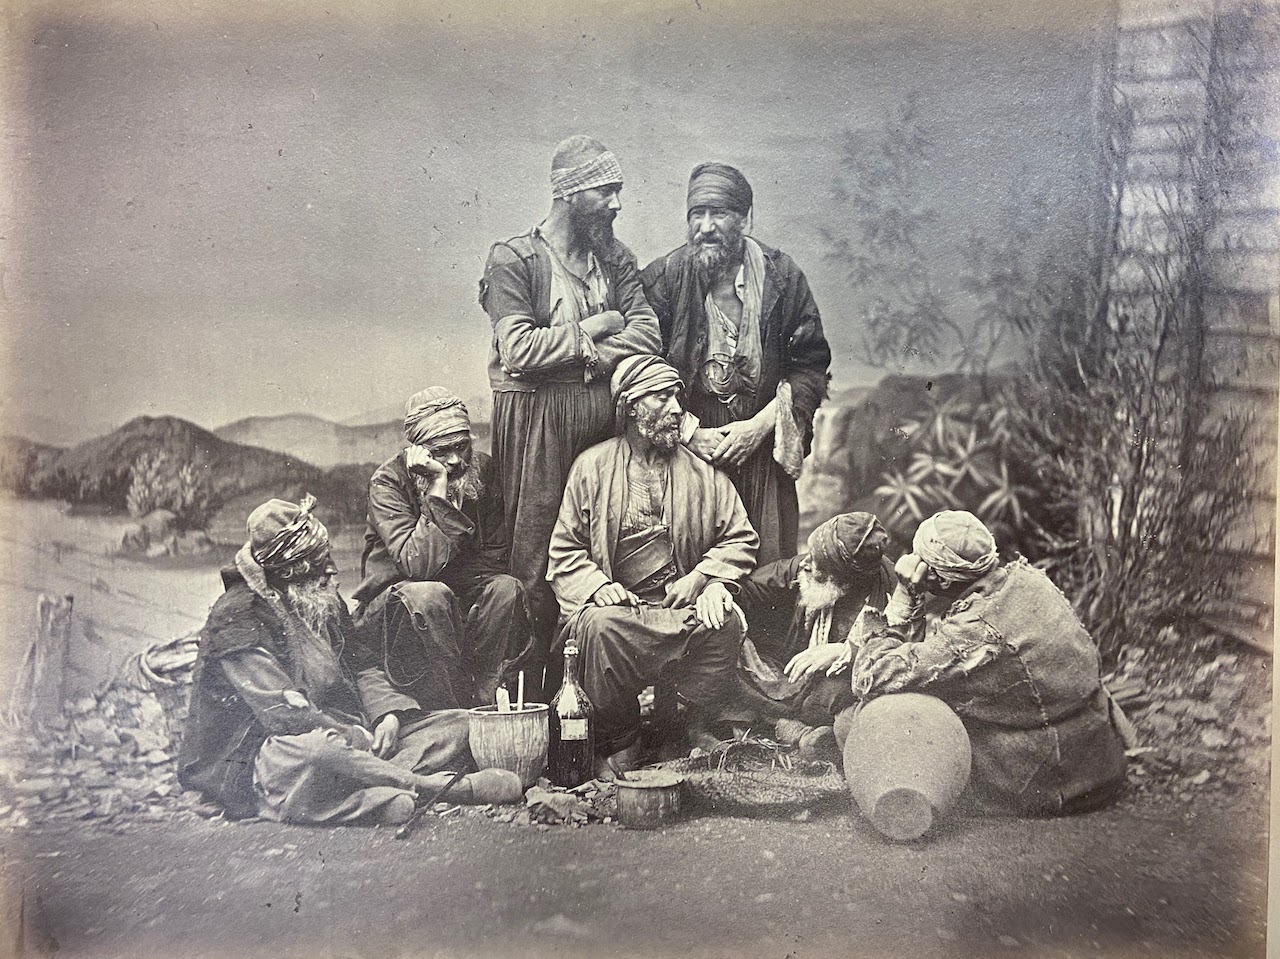 "Les Juifs," photograph from Constantinople ancienne et moderne (Ms. Coll. 445)